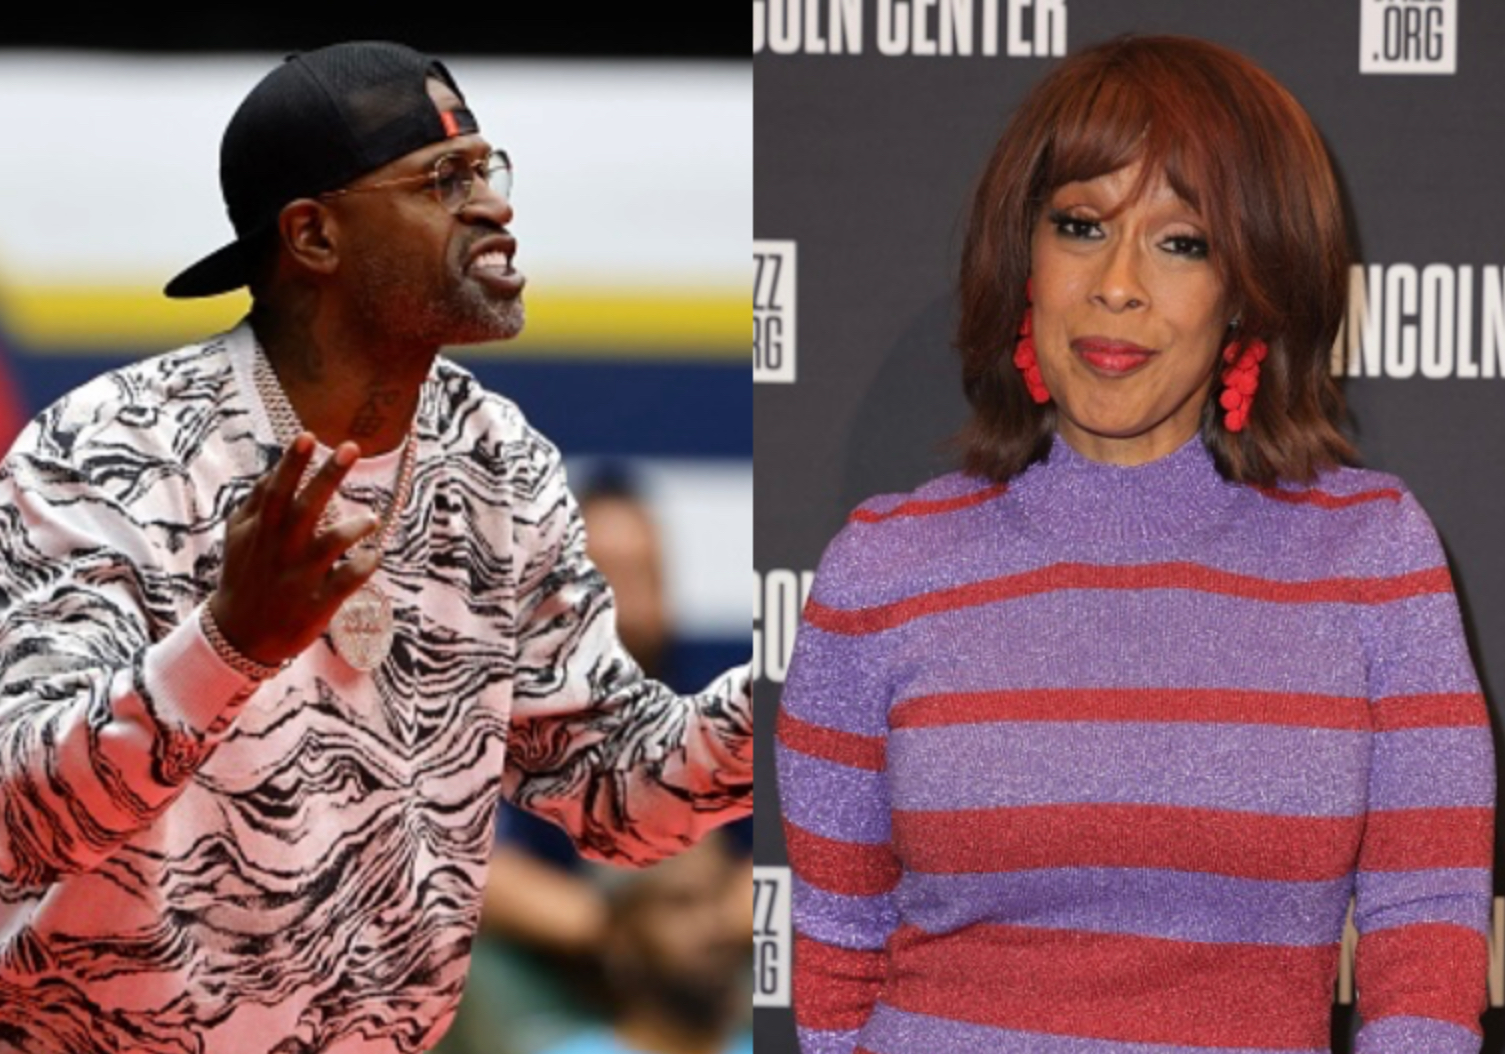 Stephen Jackson Blasts Gayle King For ‘Demeaning’ Dawn Staley In Interview About South Carolina Championship